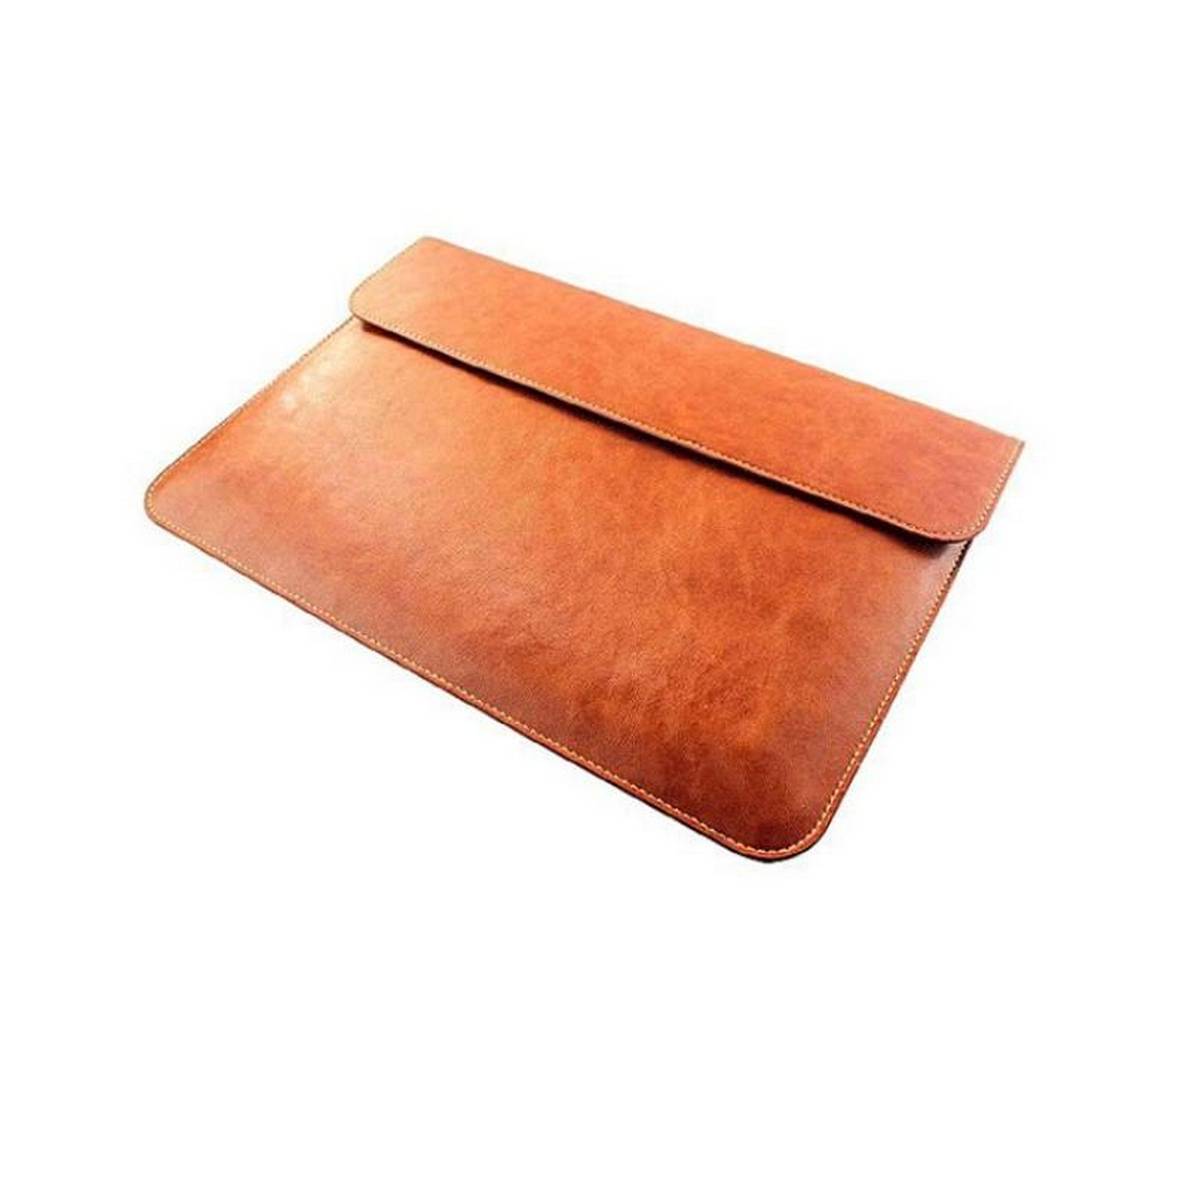 Leather Laptop Sleeve 13 Inch Brown - Trendy Store Pakistan